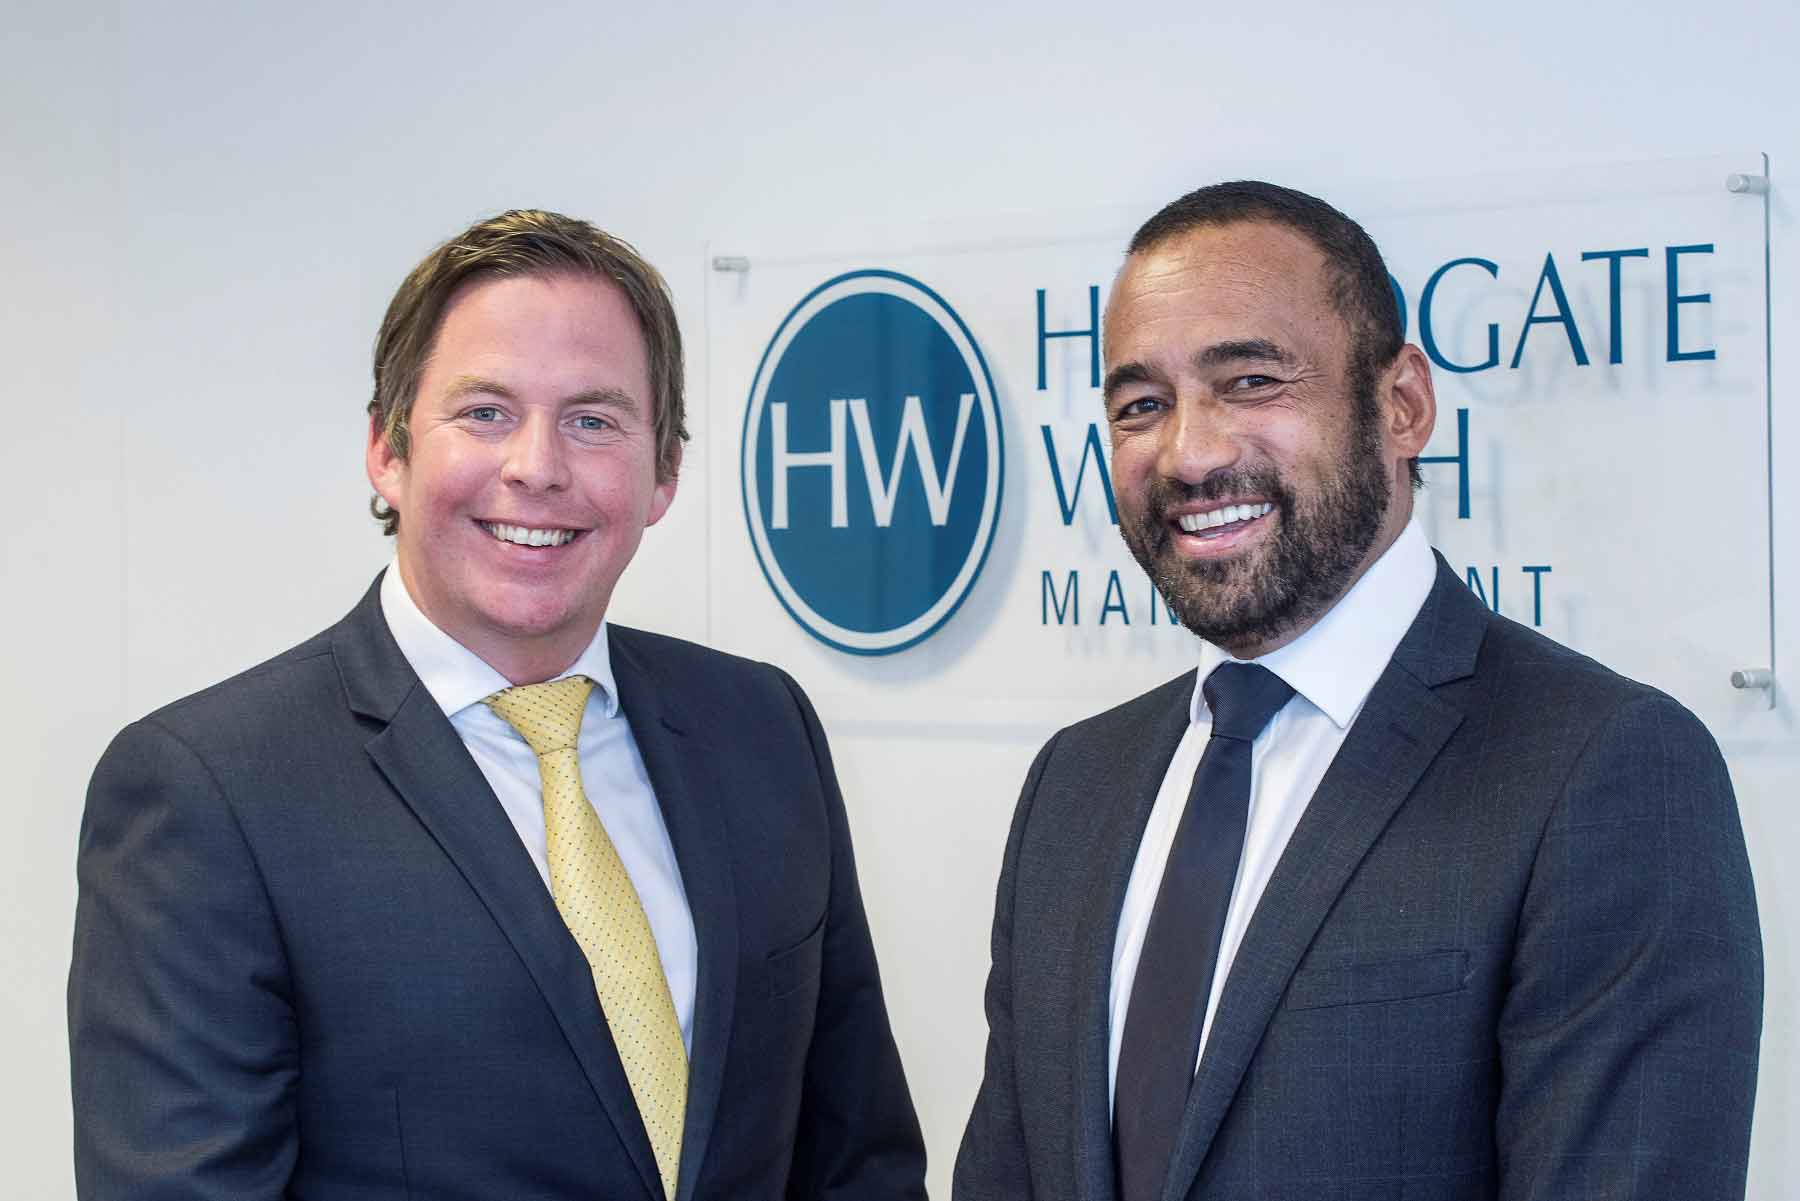 Lee-Hurst-and-Ralph-Zoing-of-Harrogate-Wealth-Management